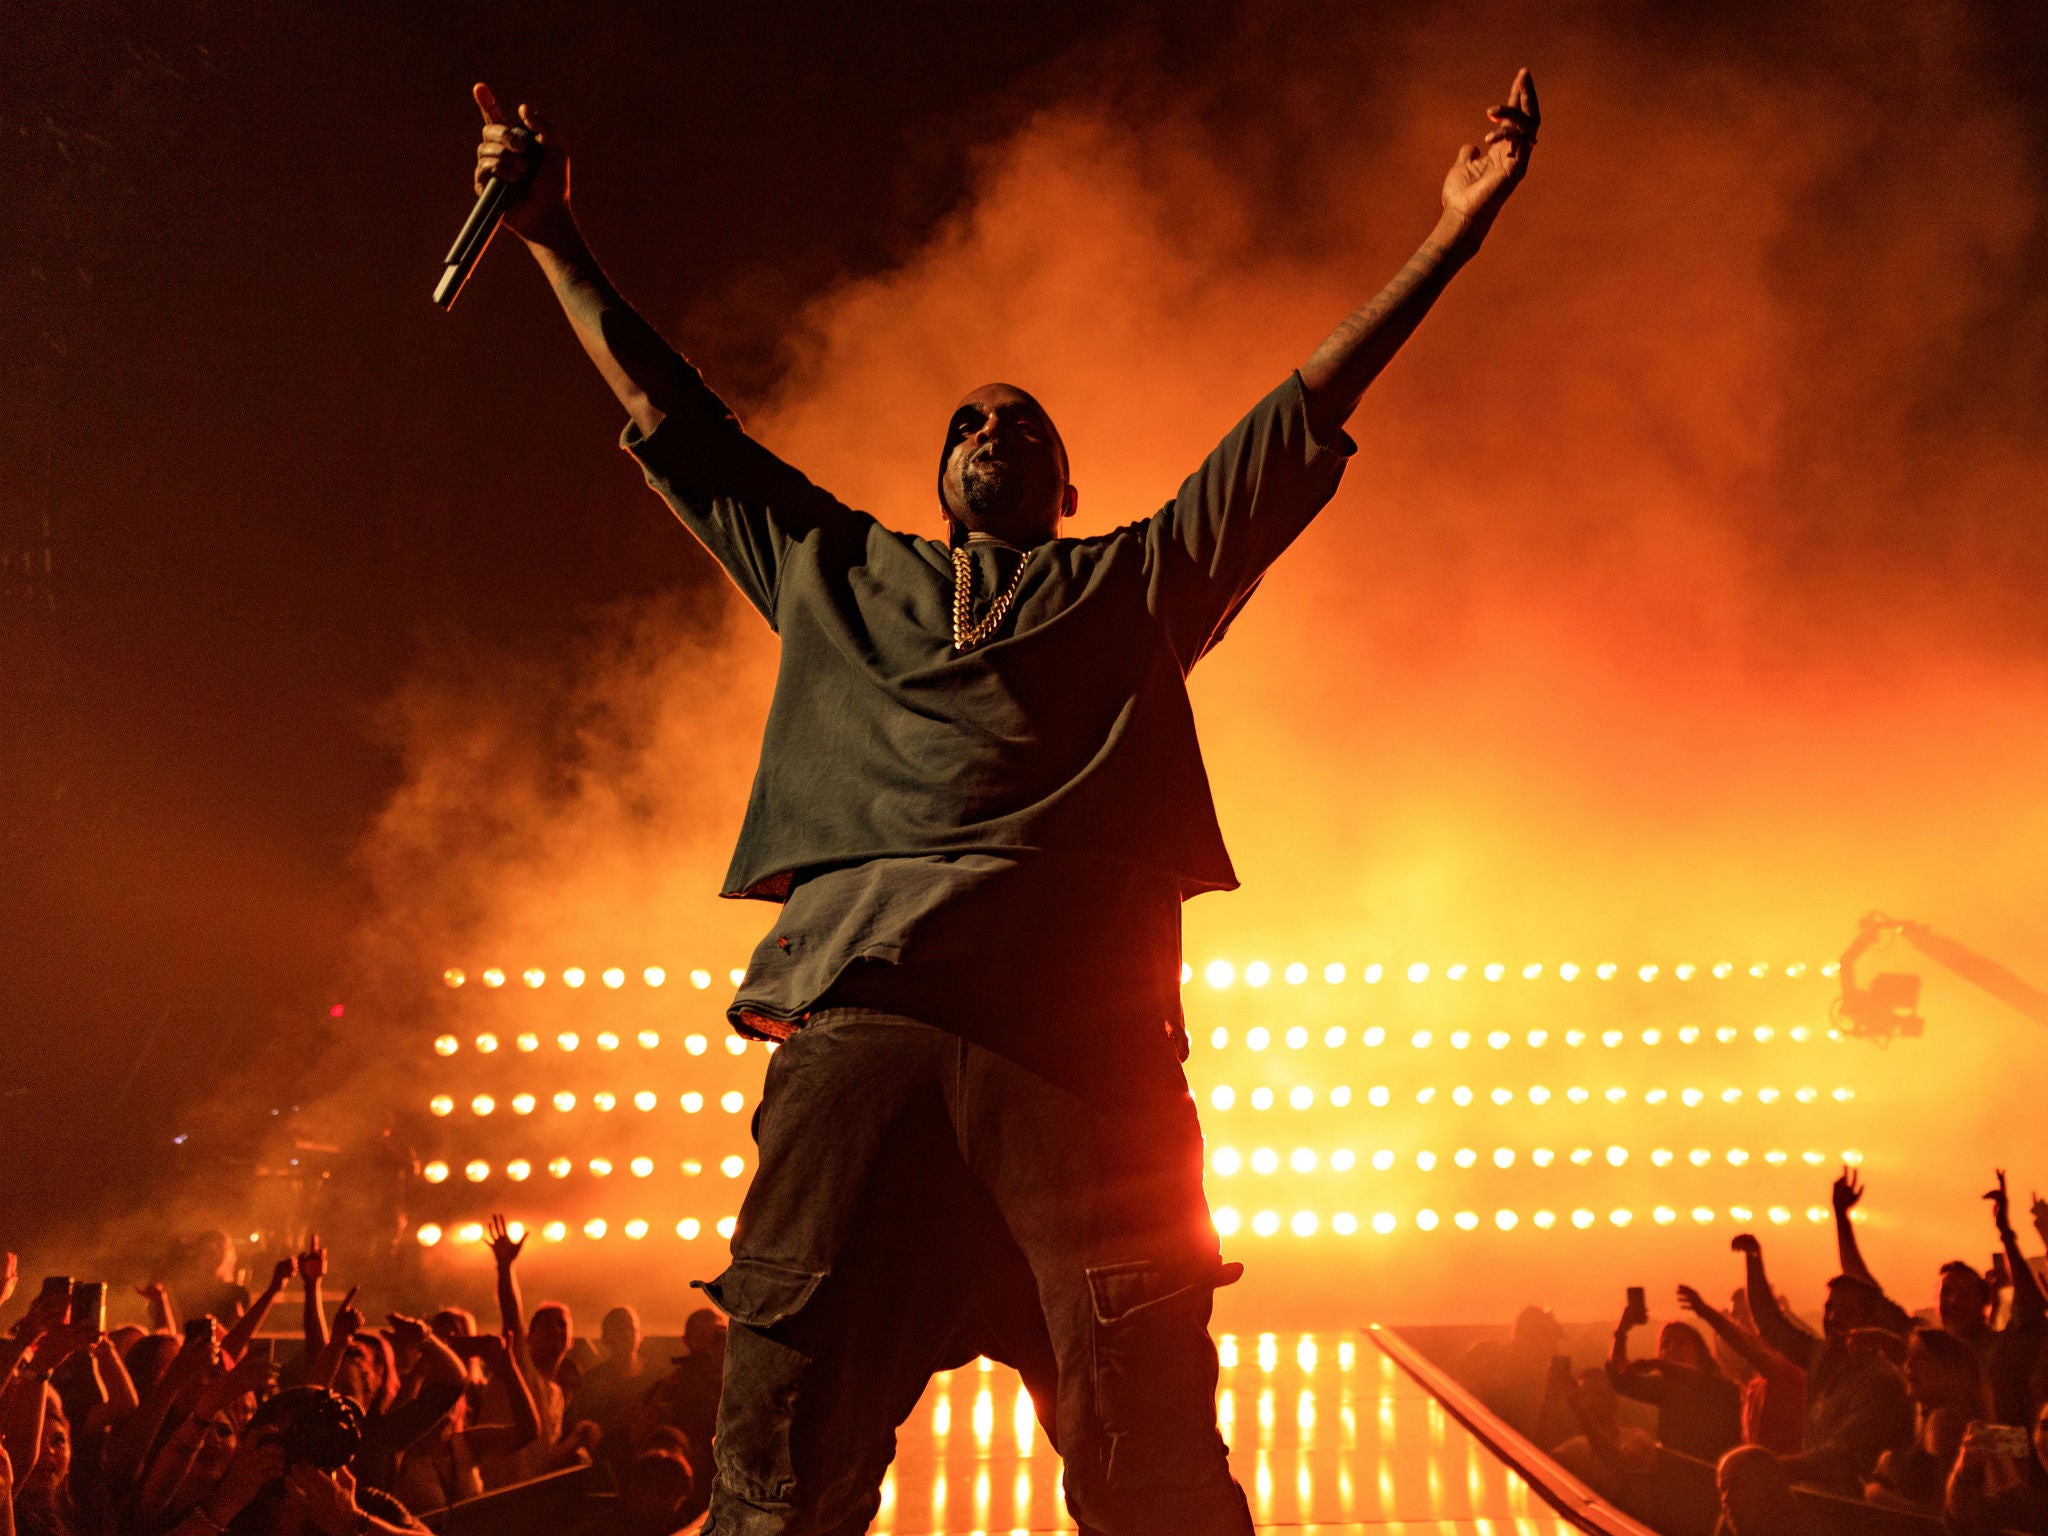 Kanye West puts the ego aside and admits 'messed up' Glastonbury